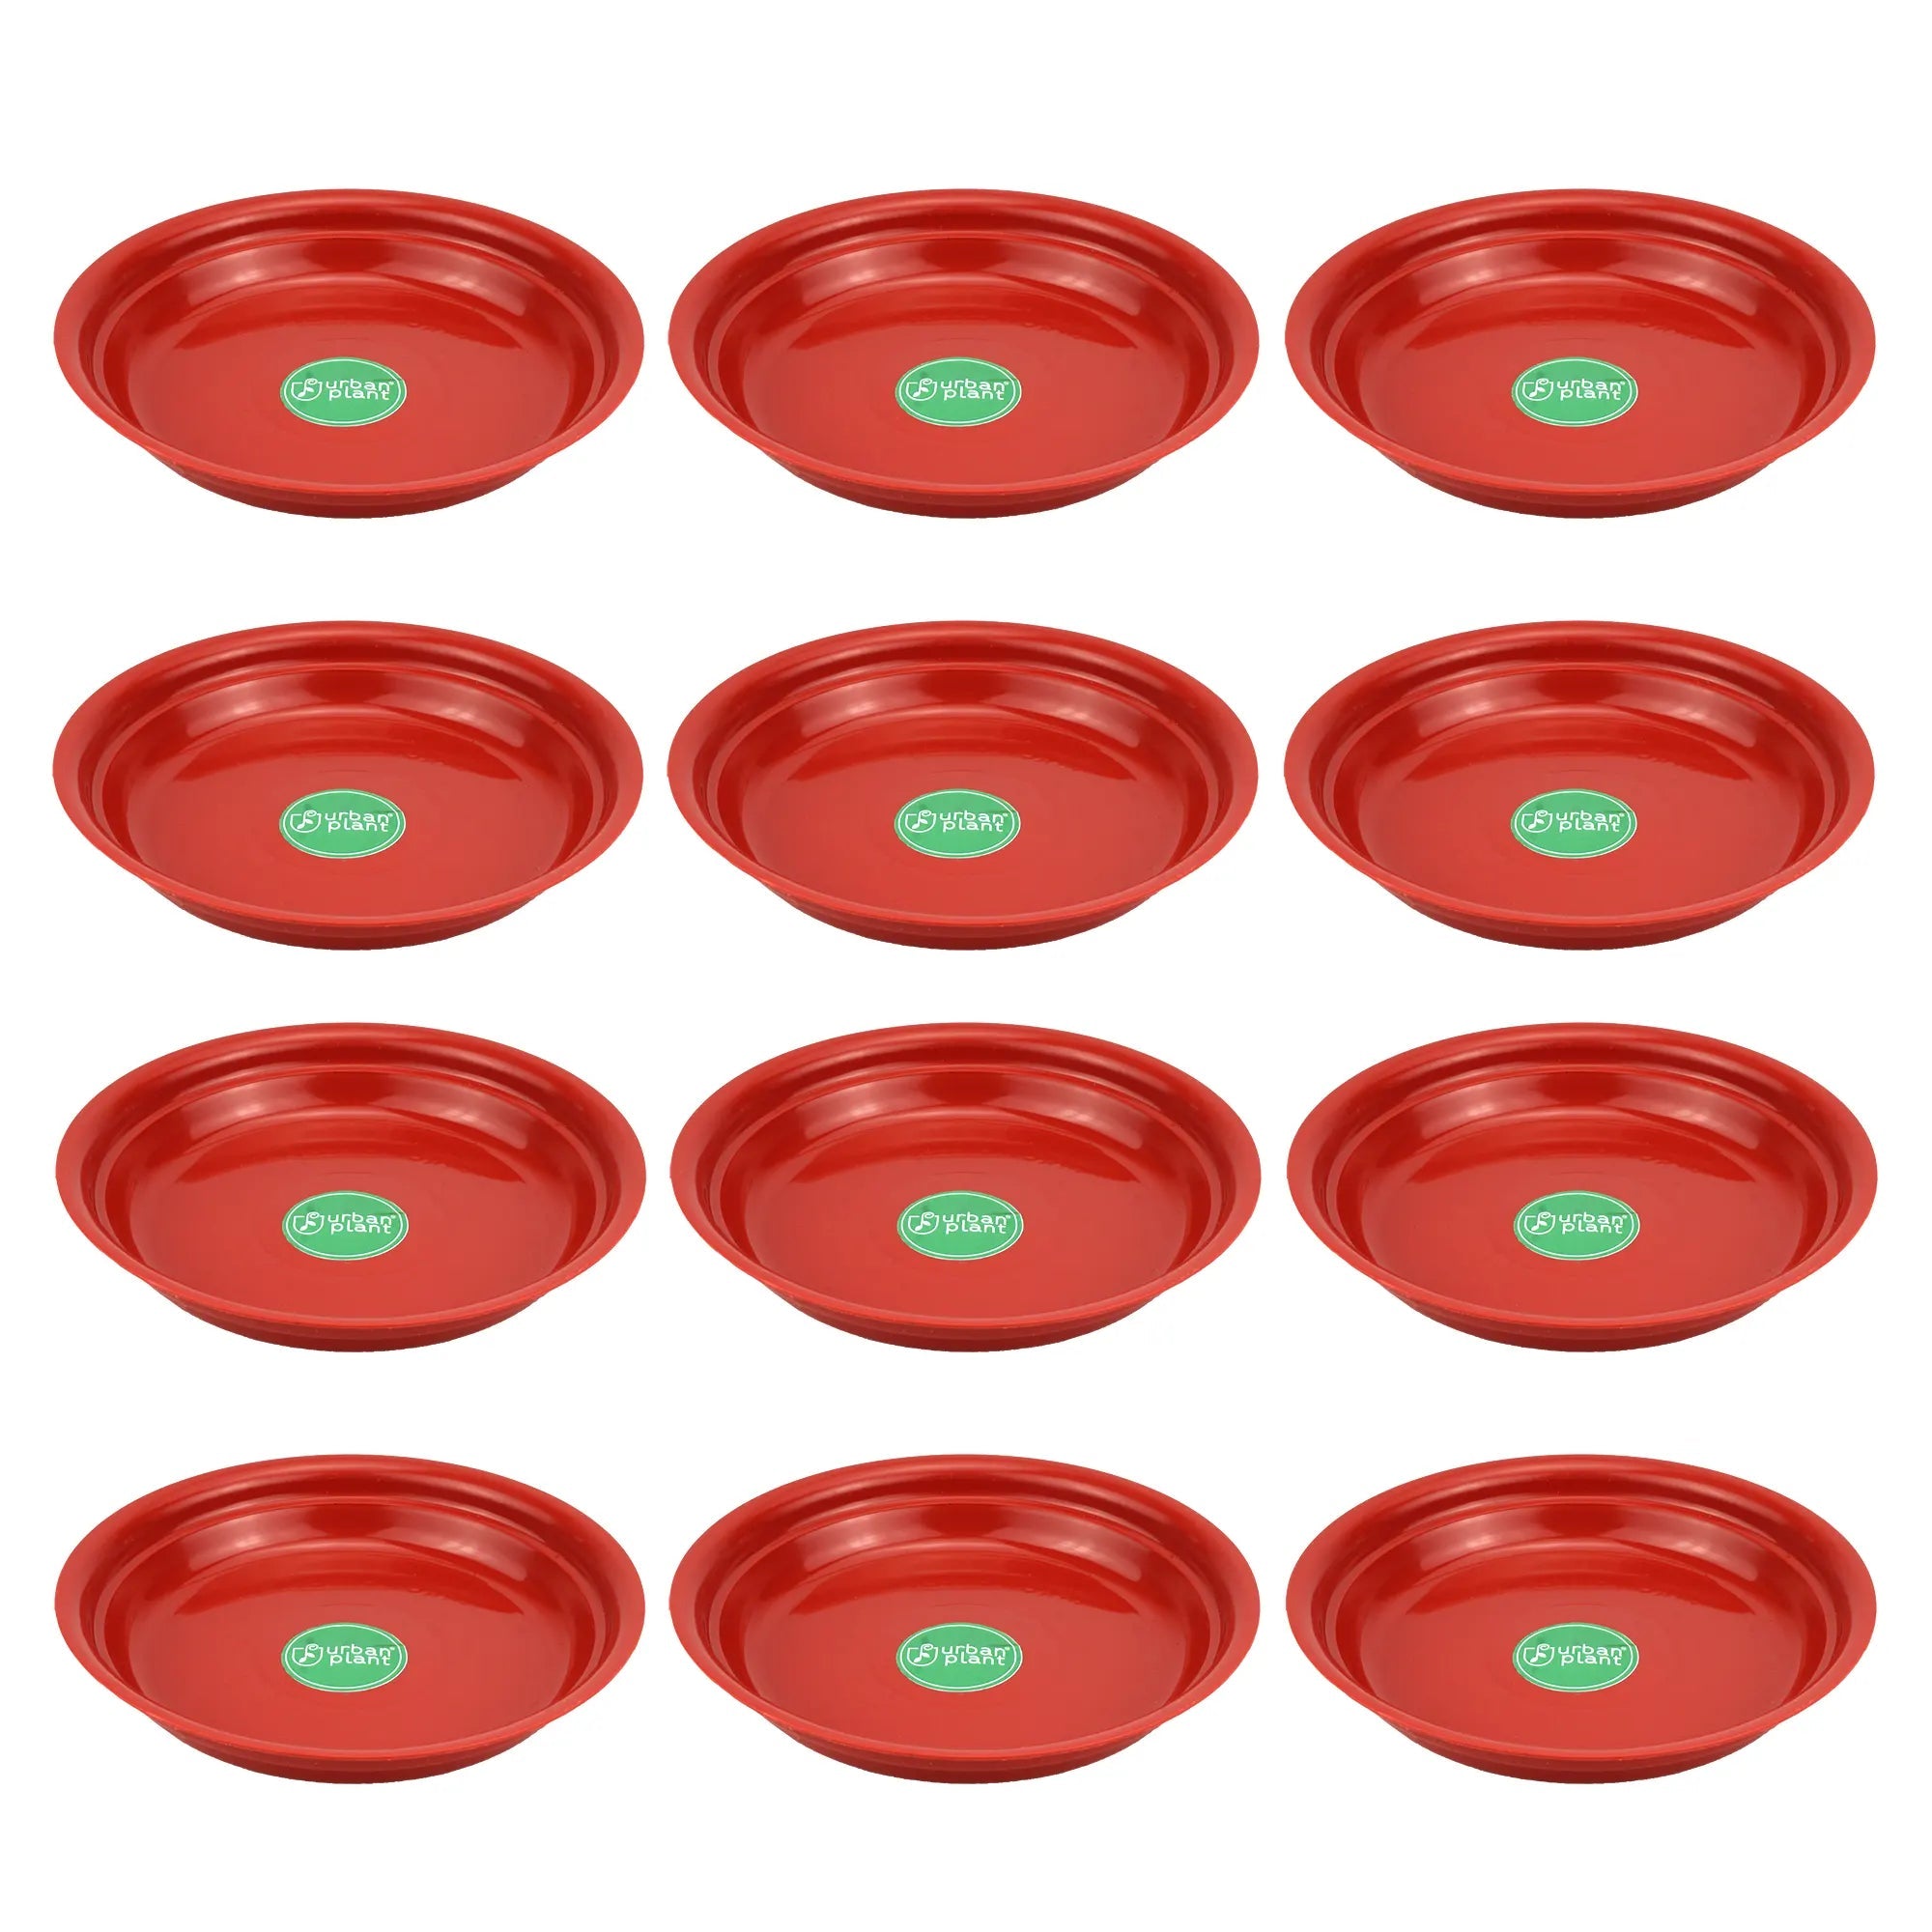 Urban Plant Round Bottom Tray (Plate/Saucer) for All Type of Pots Urban Plant 6 Inch Set of 12 